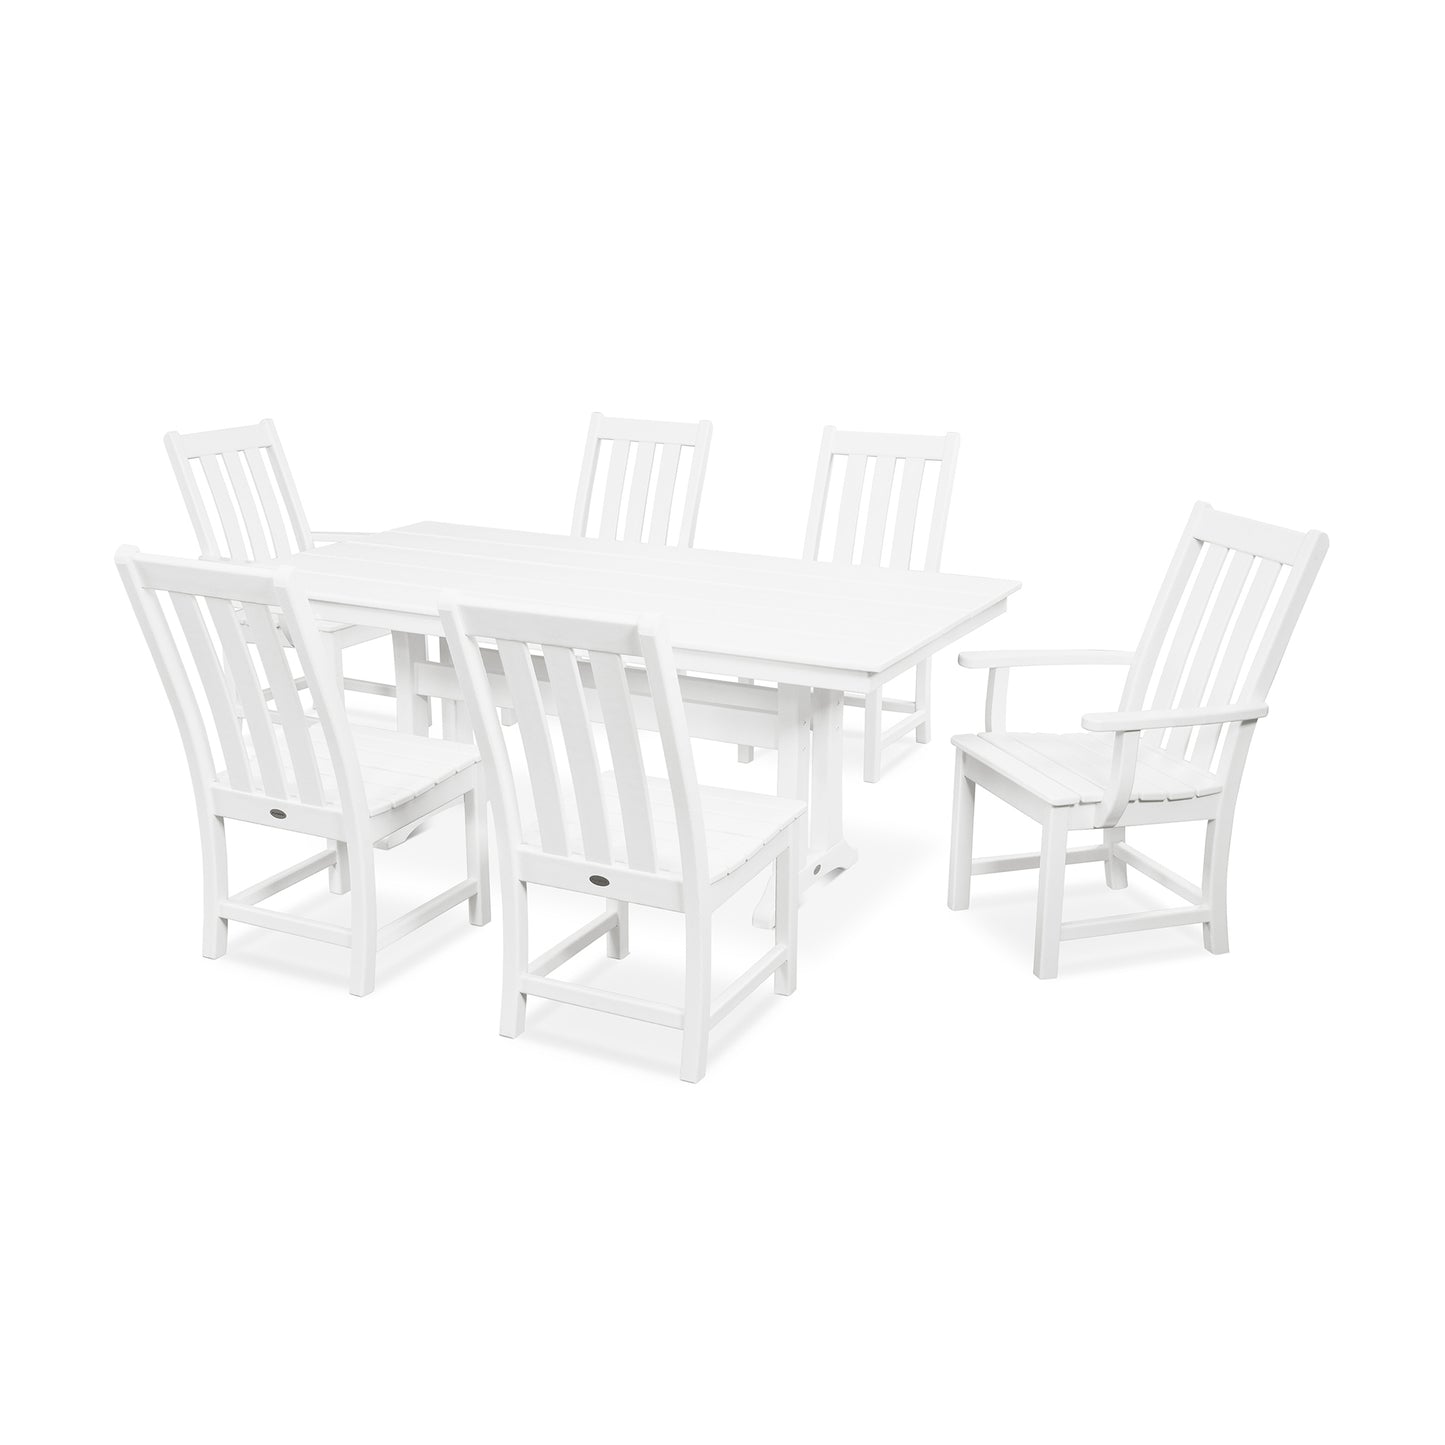 A white POLYWOOD Vineyard 7-Piece Farmhouse Trestle Dining Set featuring a rectangular table and six matching chairs with vertical slat backs, arranged on a plain white background.